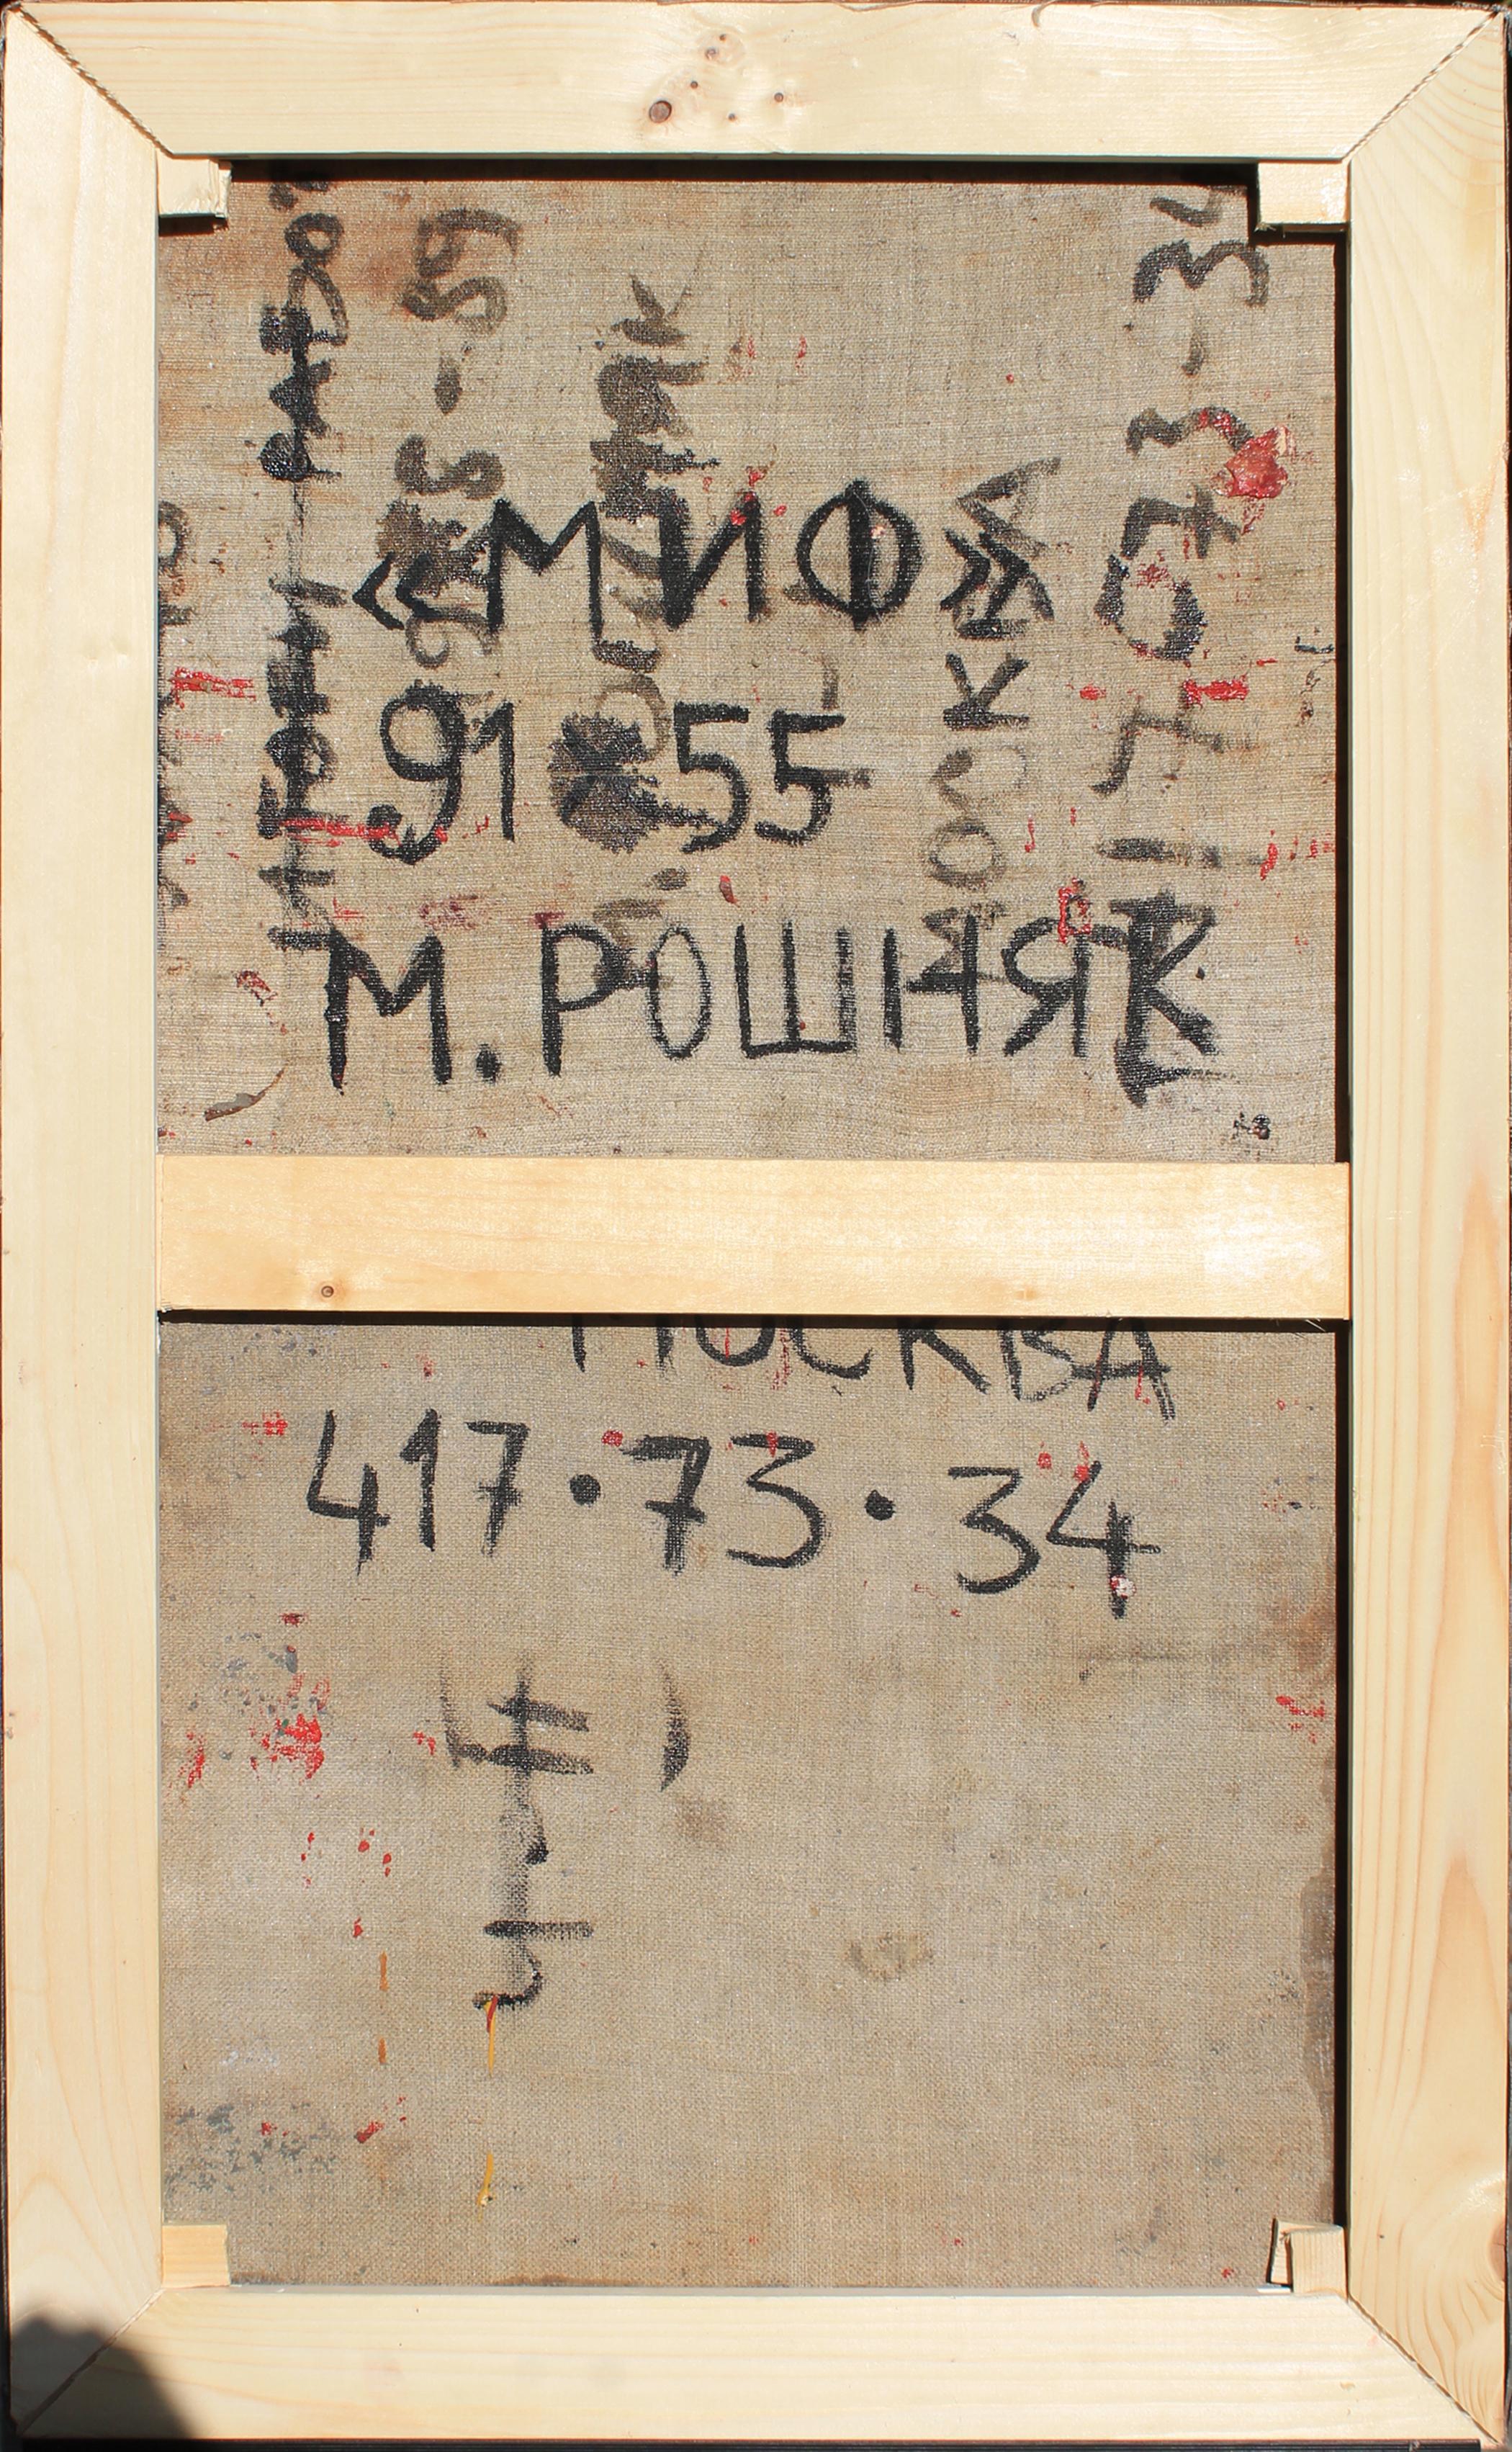 Stunning and complex work from the most active contemporary Russian artist Mikhail Roshniak (signed in Cyrillic)
Measurements: 91x55cm
Offered